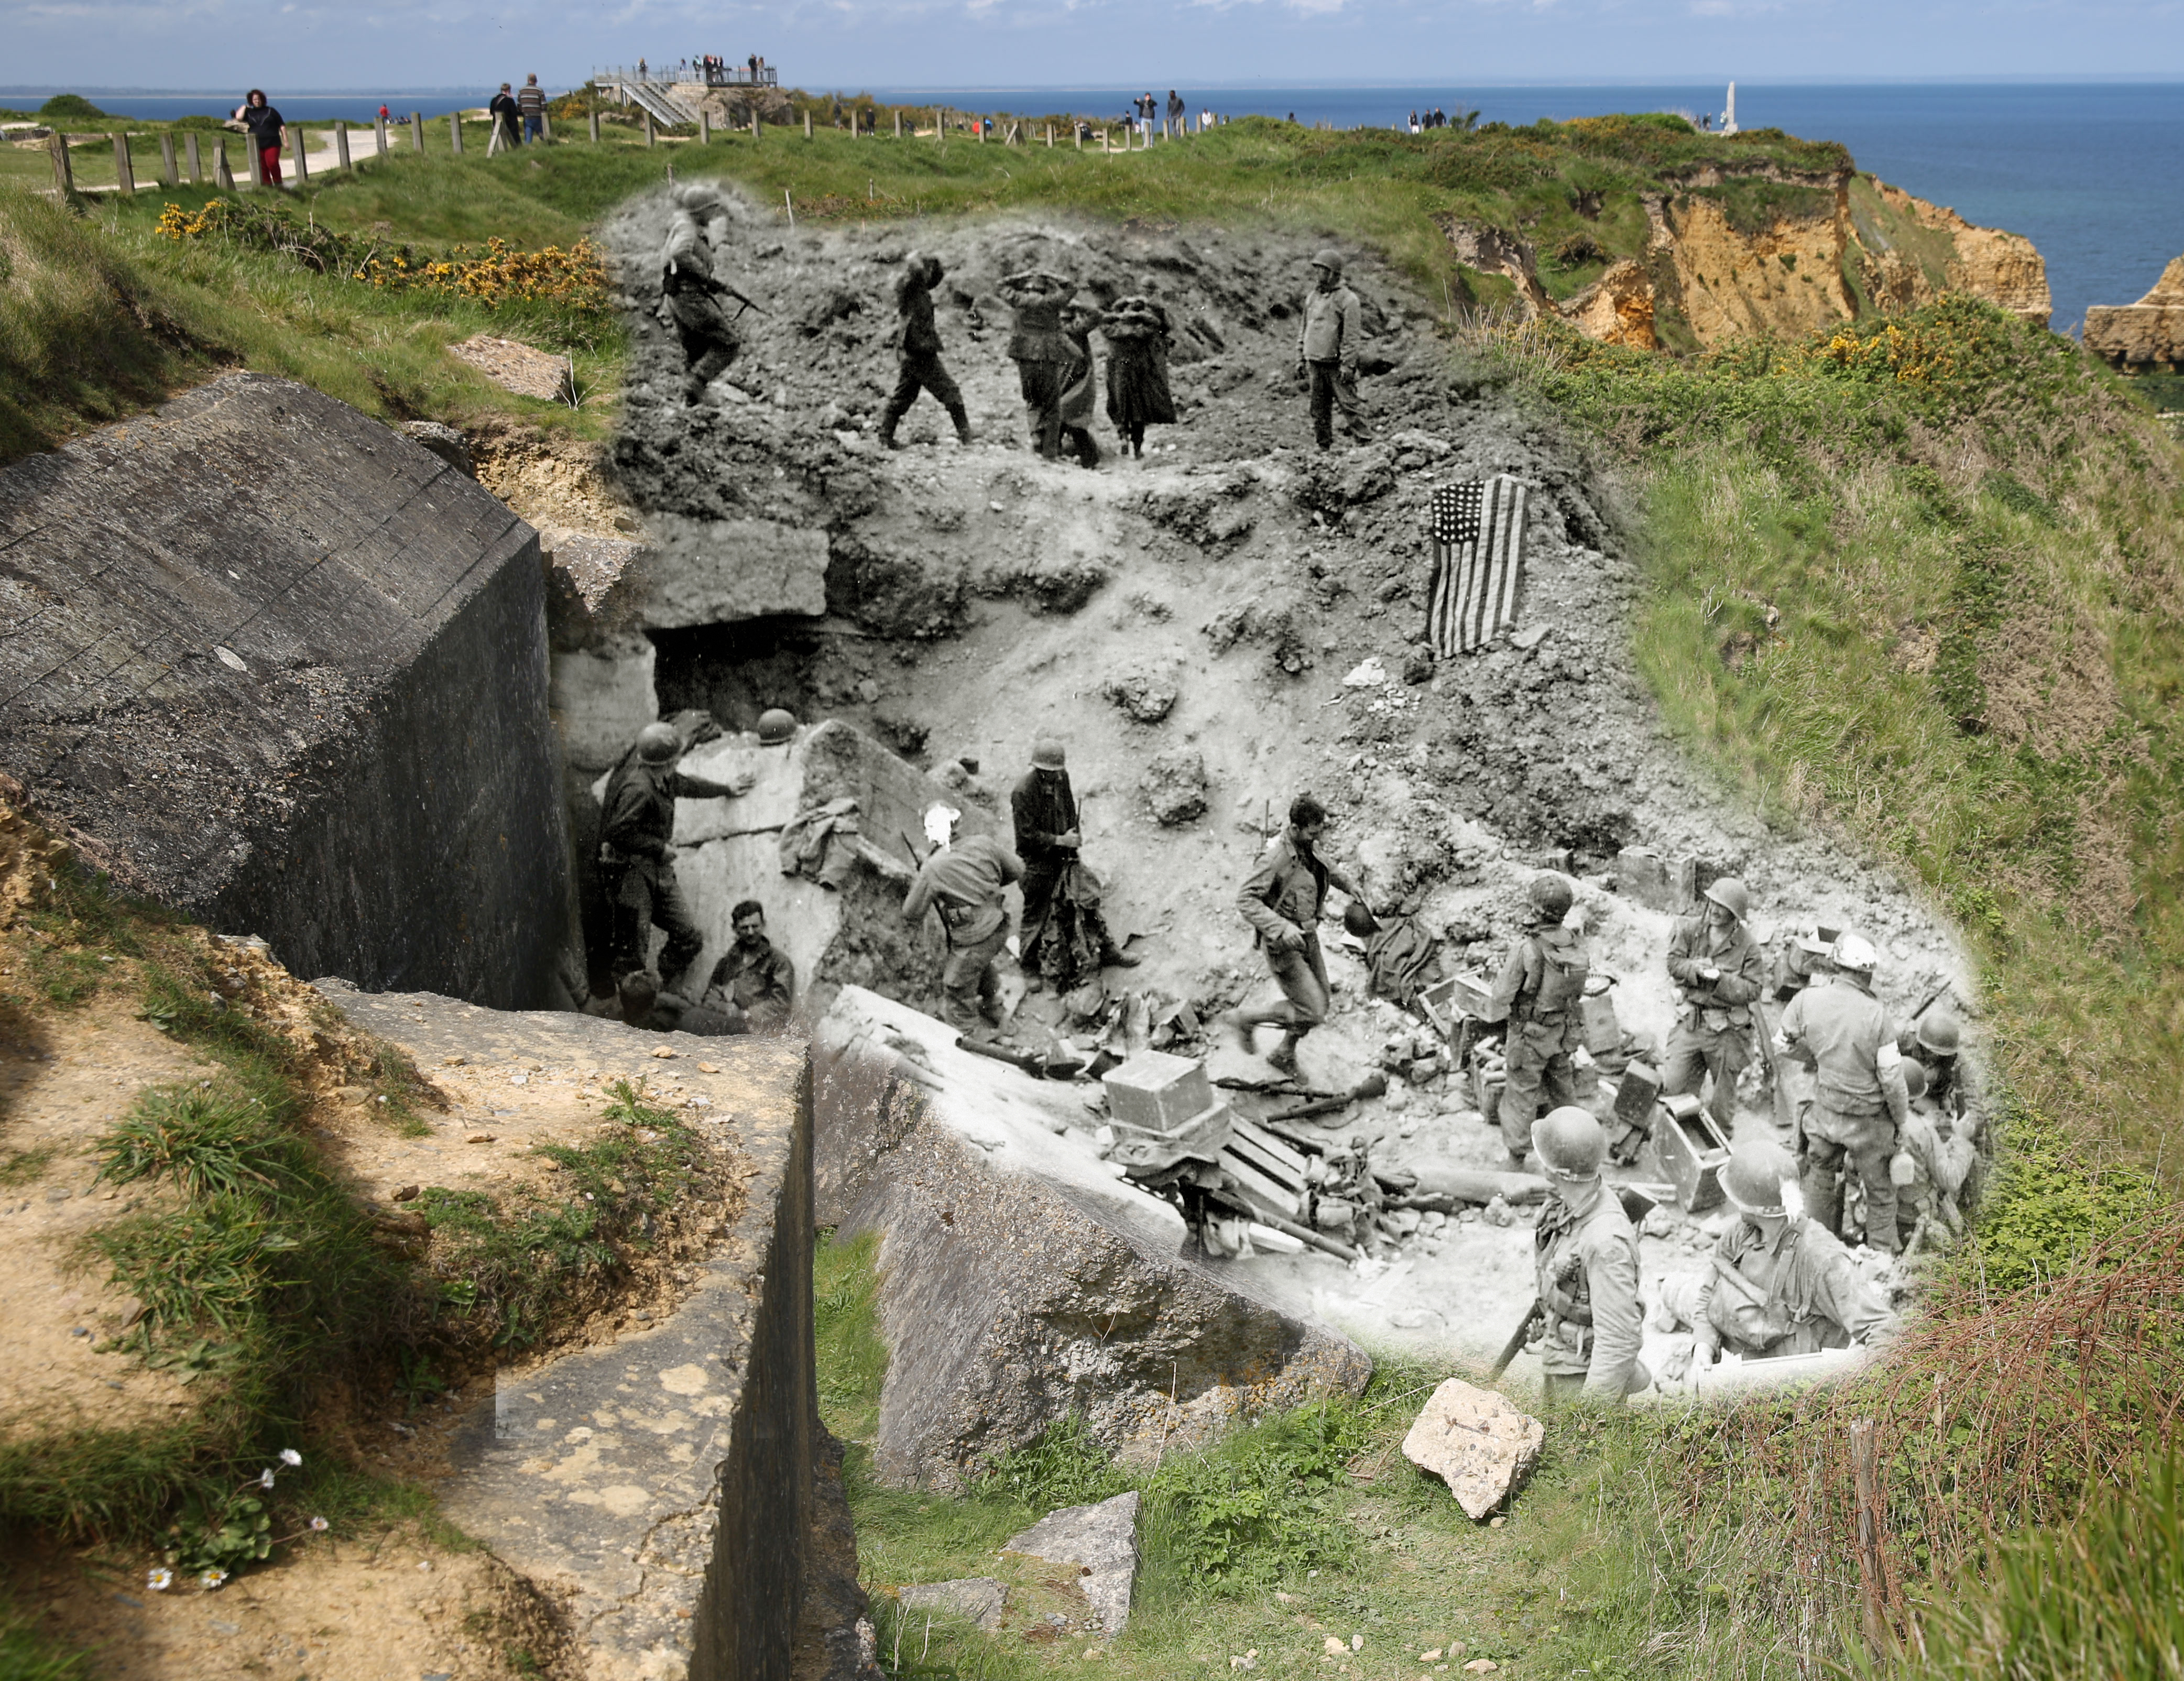 A view of the cliffs on May 6, 2014 in Pointe du Hoc, France. Overlay: After the assault at the cliffs of Pointe du Hoc by the 2nd Ranger Battalion (D, E and F Company) Colonel James E. Rudder establishes a Post Commando on June 1944.